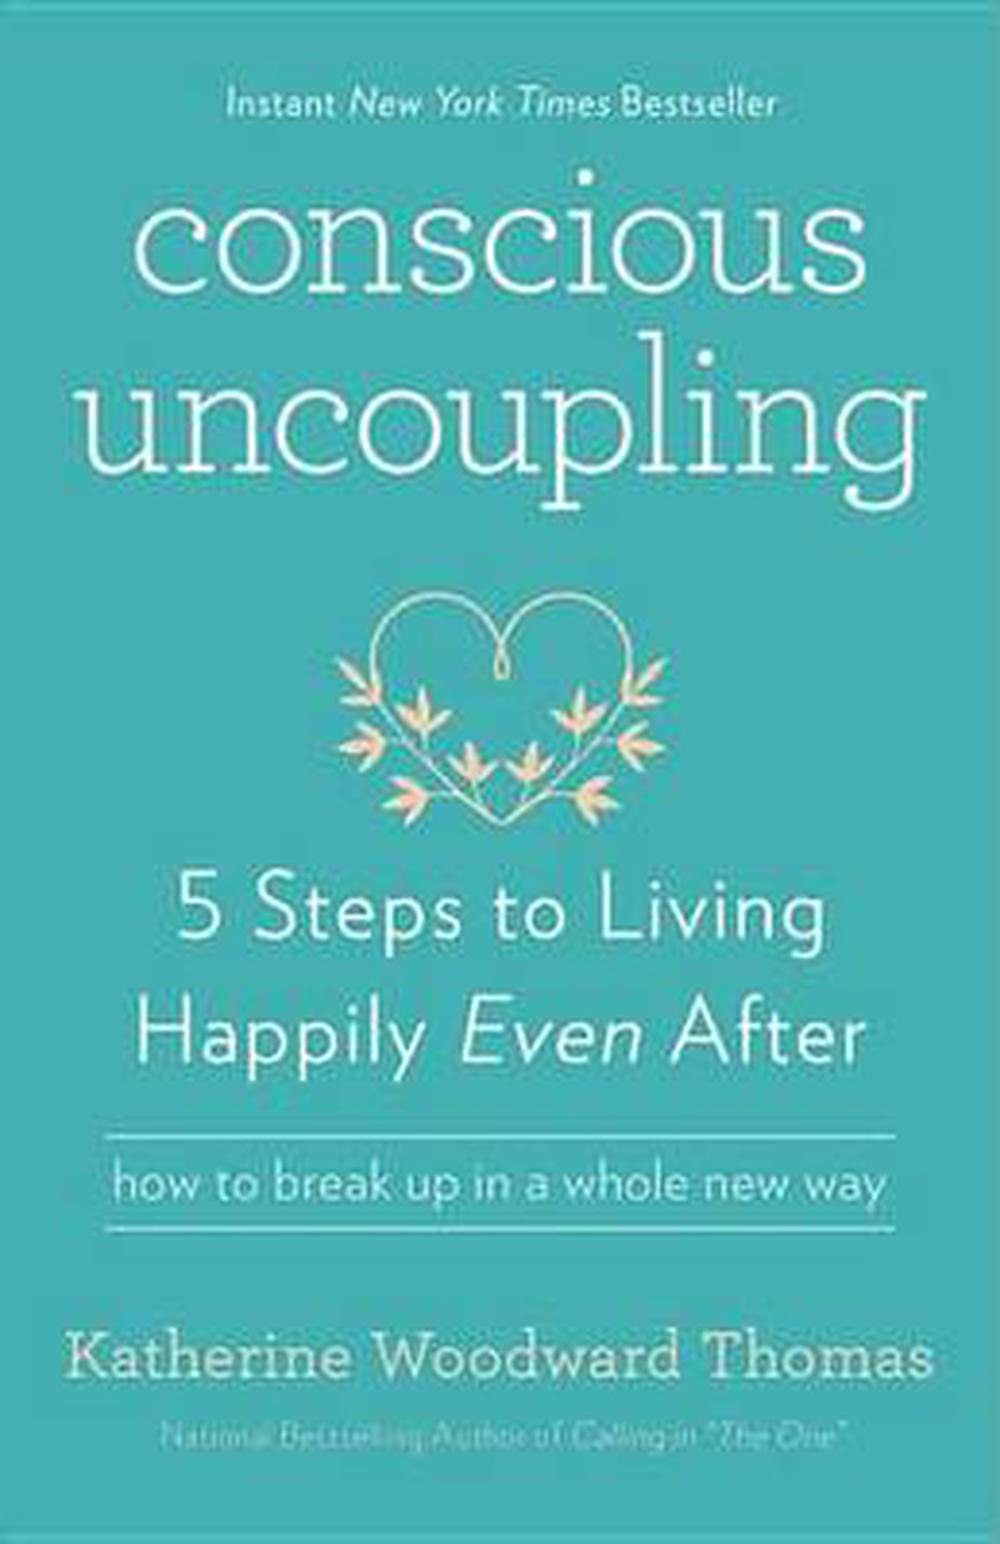 Image of Conscious Uncoupling - 5 Steps to Living Happily Even After - how to break up in a whole new way